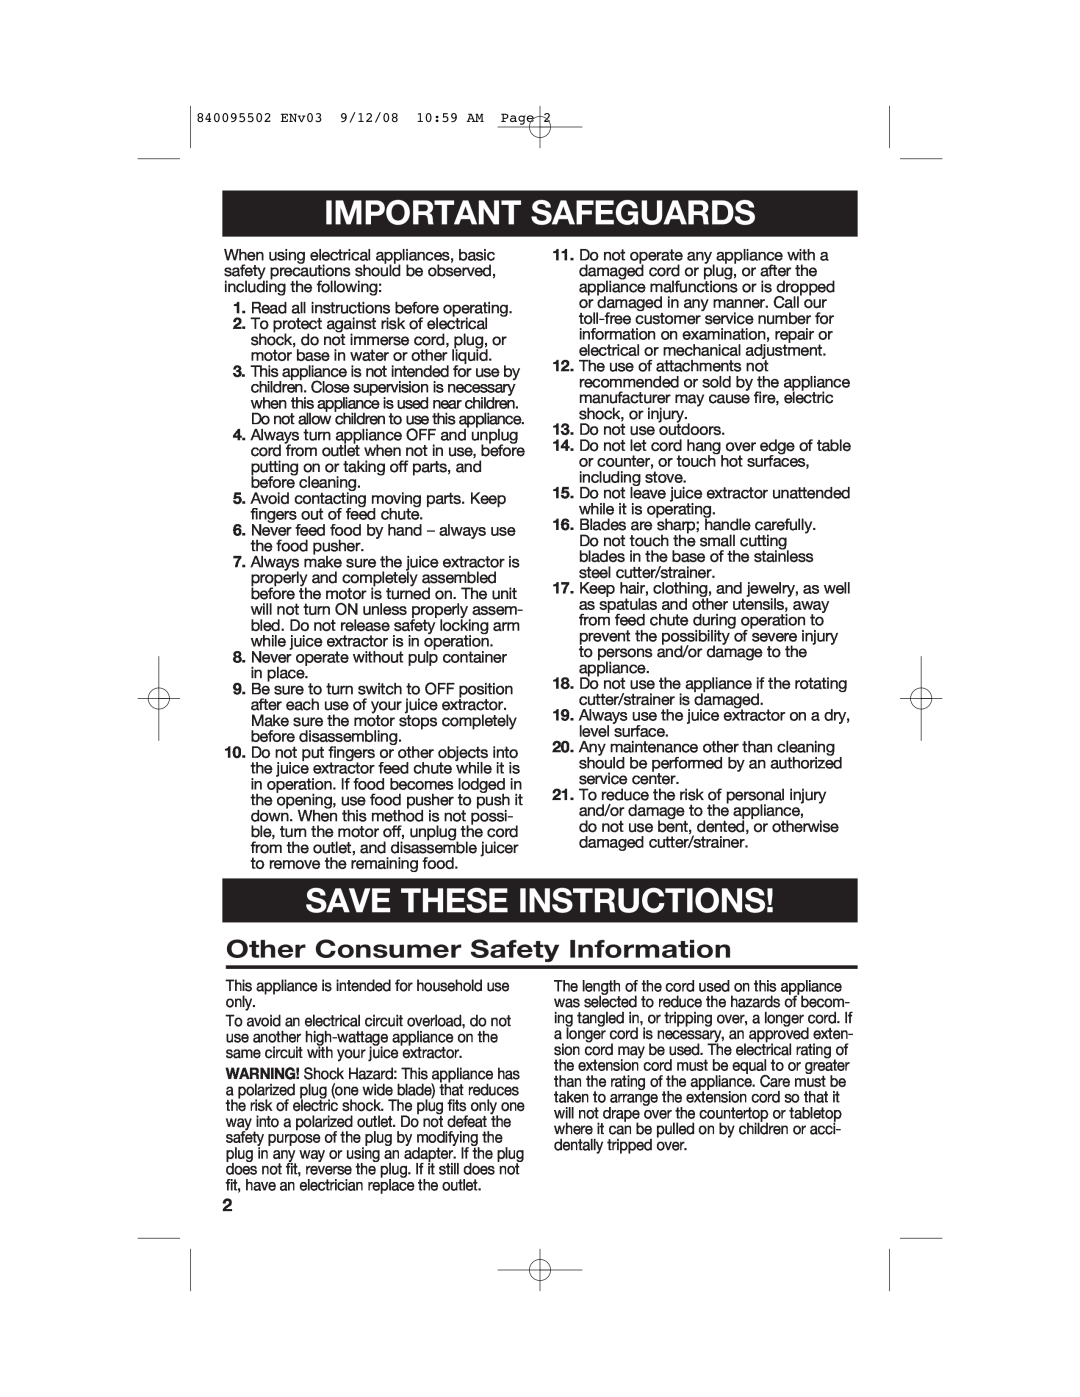 Hamilton Beach 67801 manual Important Safeguards, Save These Instructions, Other Consumer Safety Information 